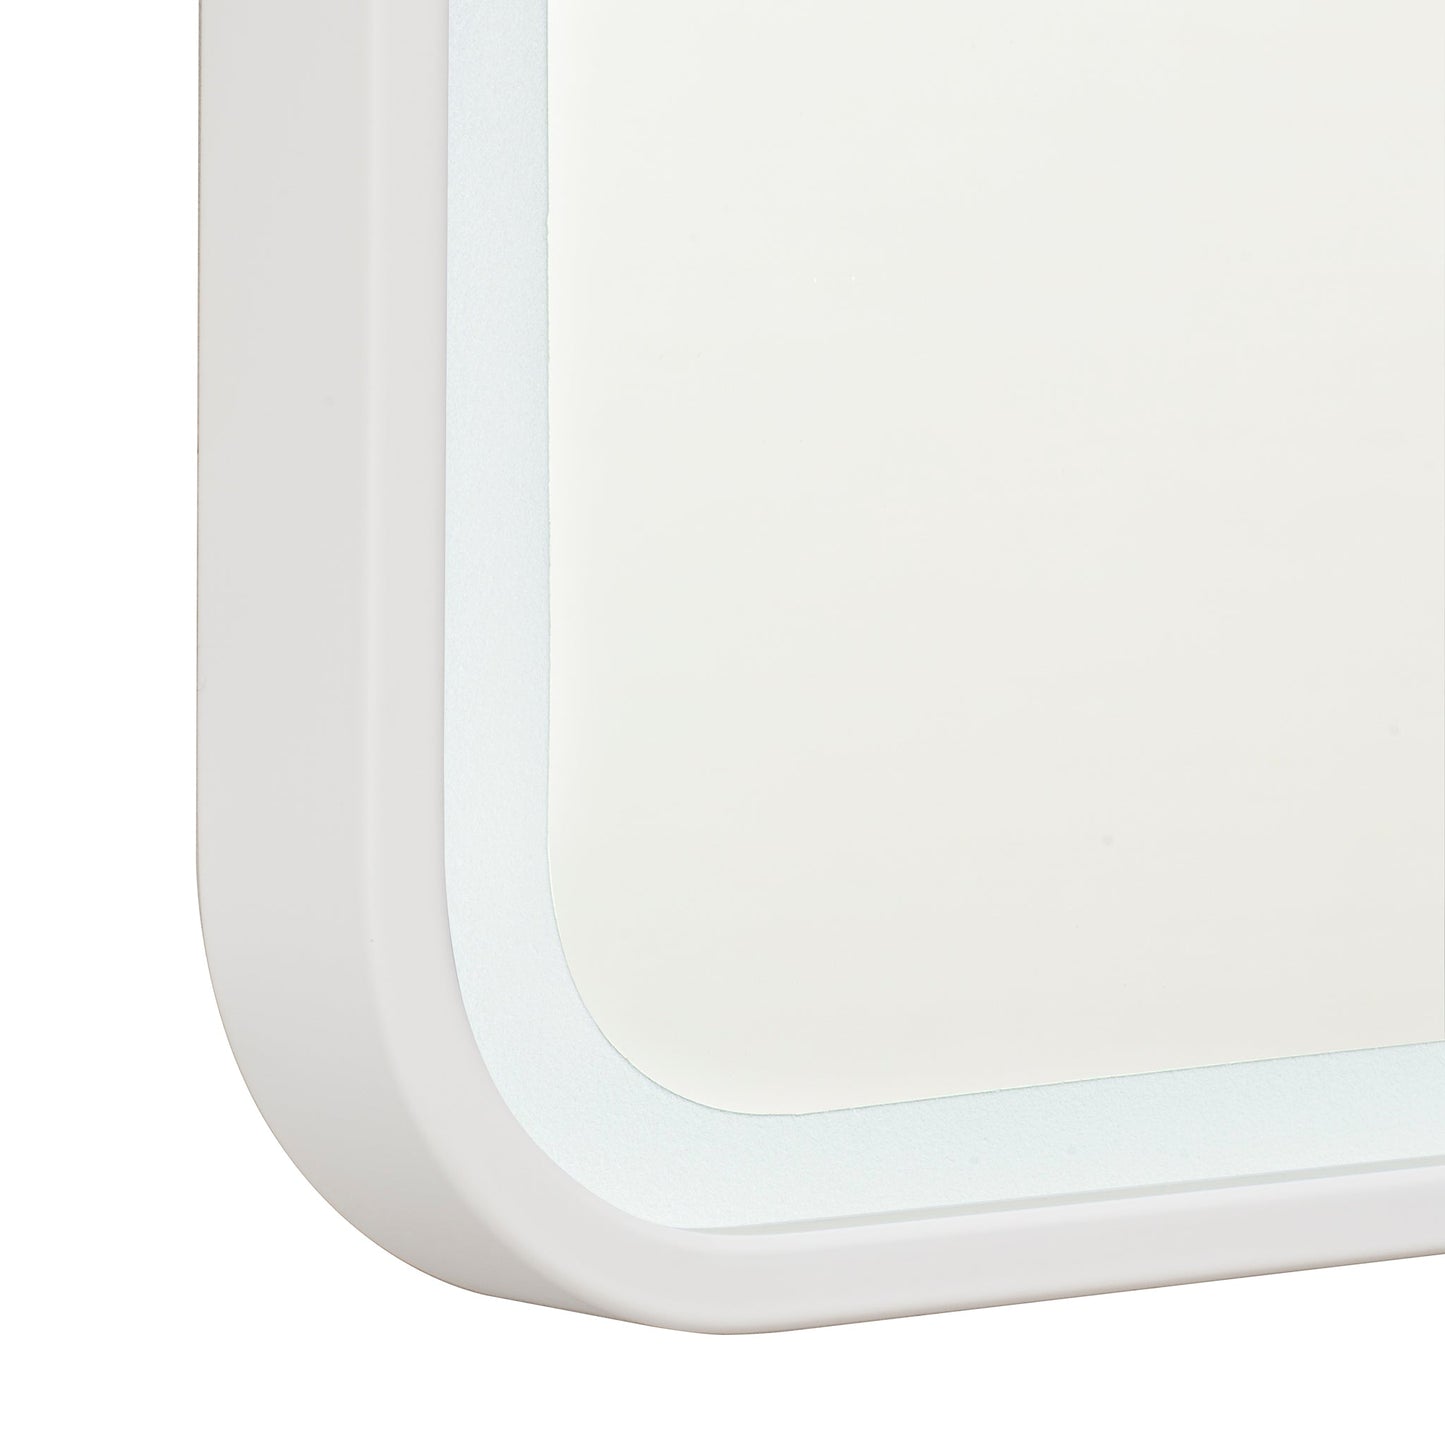 Arco Arch 800mm x 800mm Frontlit LED Framed Mirror in Matte White with Demister